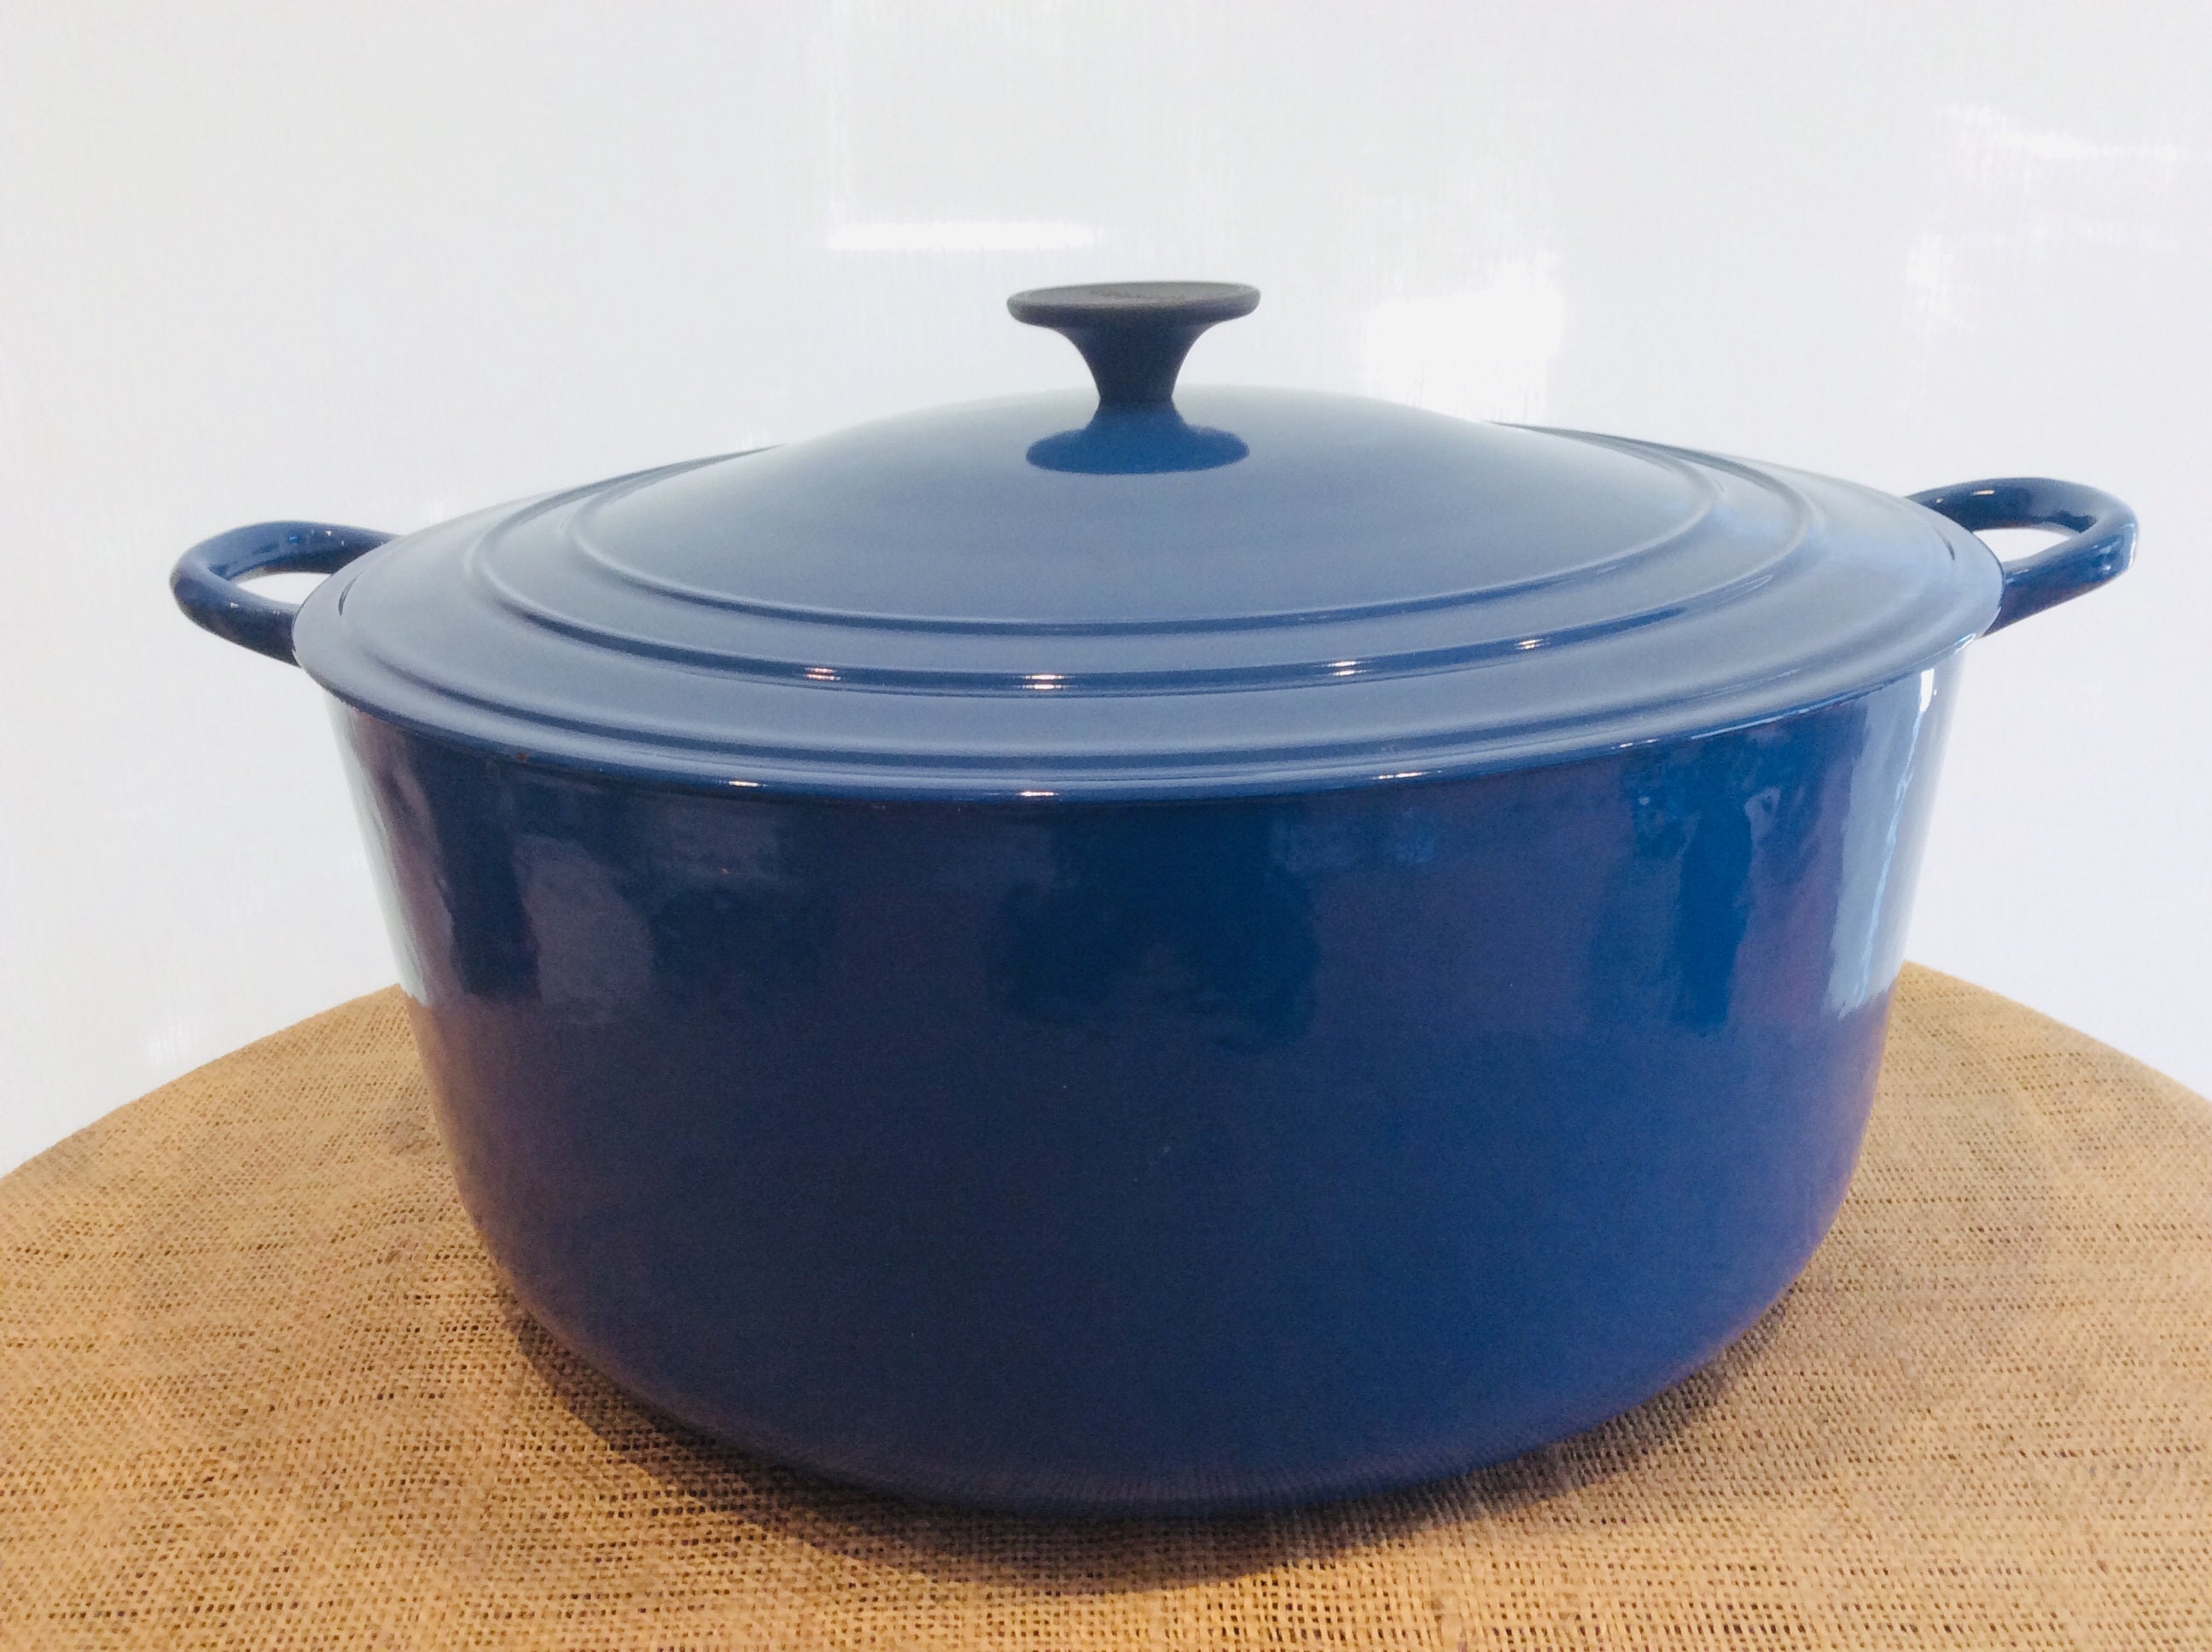 Tramontina Teal Covered Enameled Cast Iron Braiser Dutch Oven 4QT 3.7L 12  NEW 